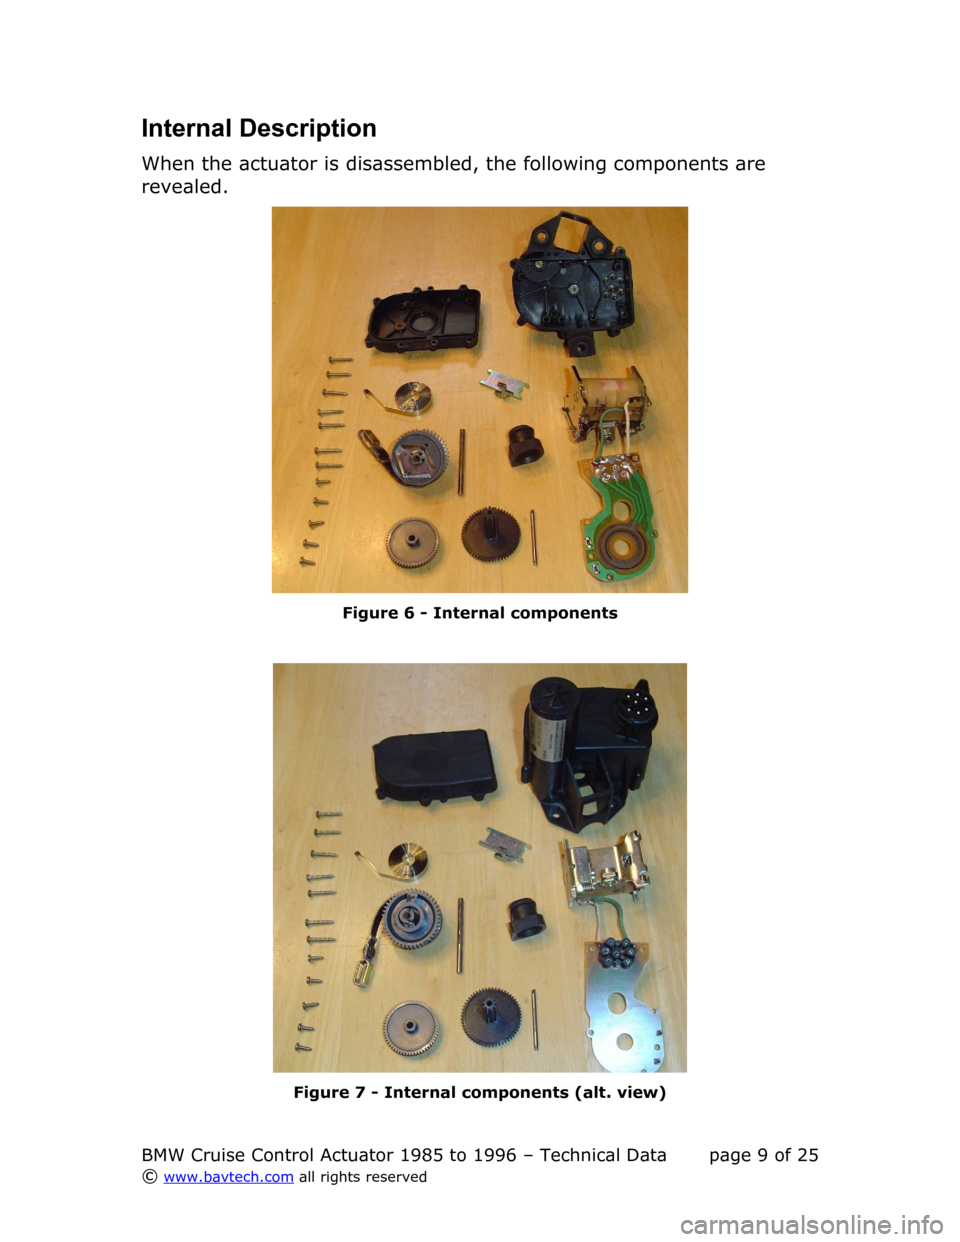 BMW 7 SERIES 1988 E32 Cruise Control Acutator Internal Description
When the actuator is disassembled, the following components are  
revealed.
Figure  6  - Internal components
Figure  7  - Internal components (alt. view)
BMW Cruise Control Actuat